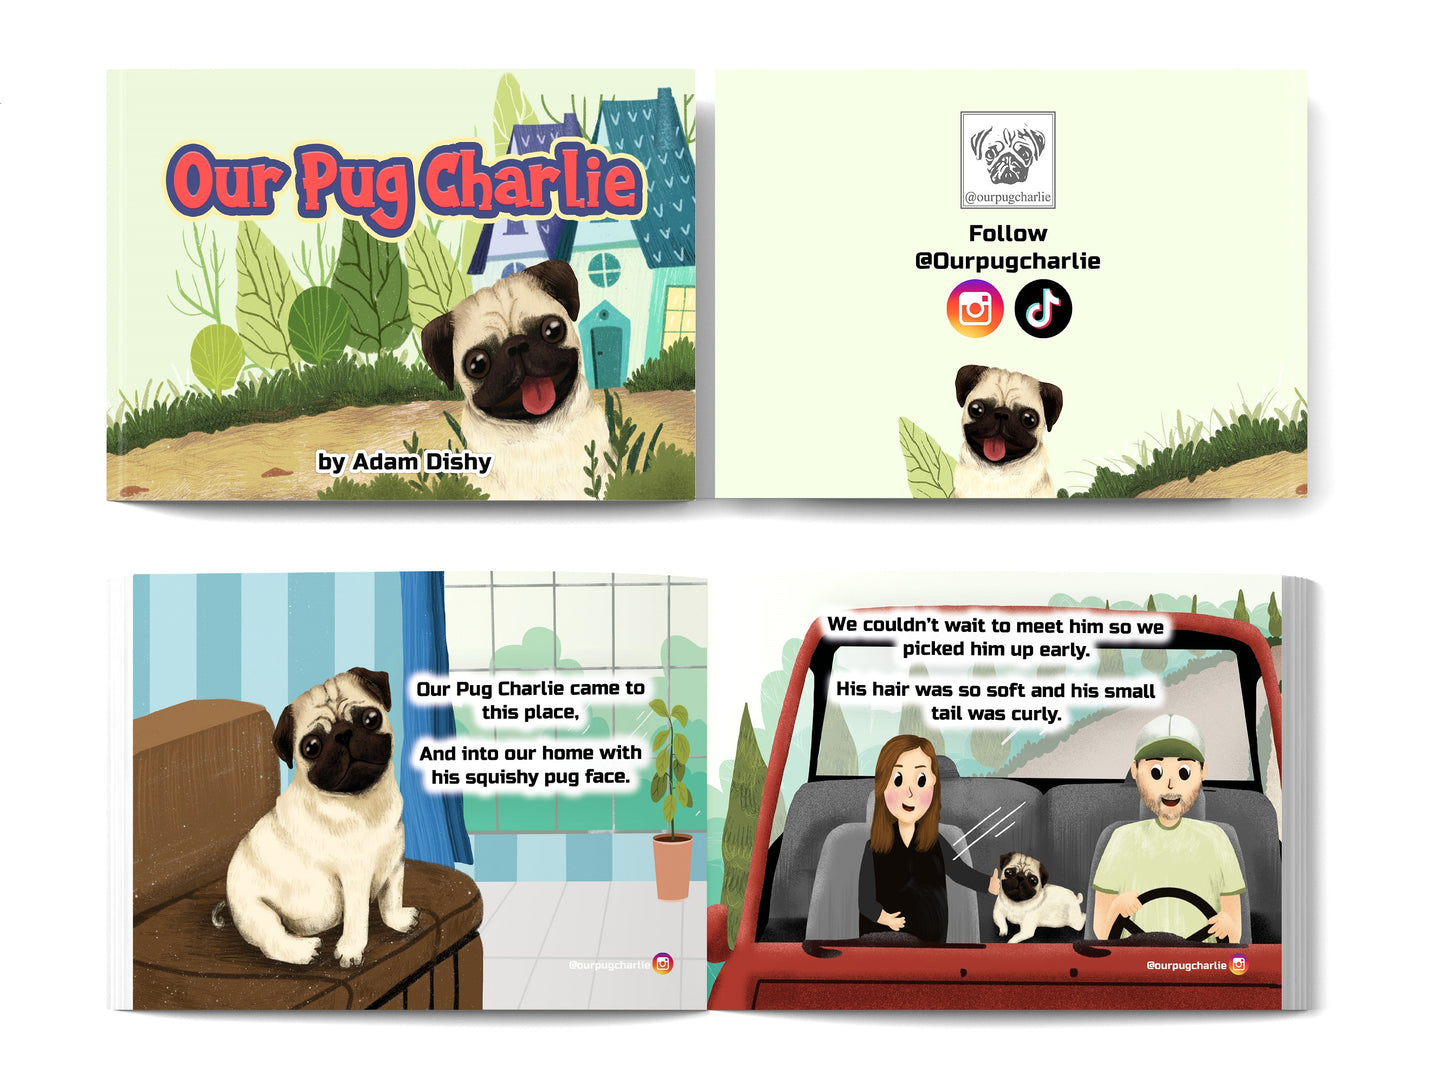 Children's Books - Our Pug Charlie by Adam Dishy